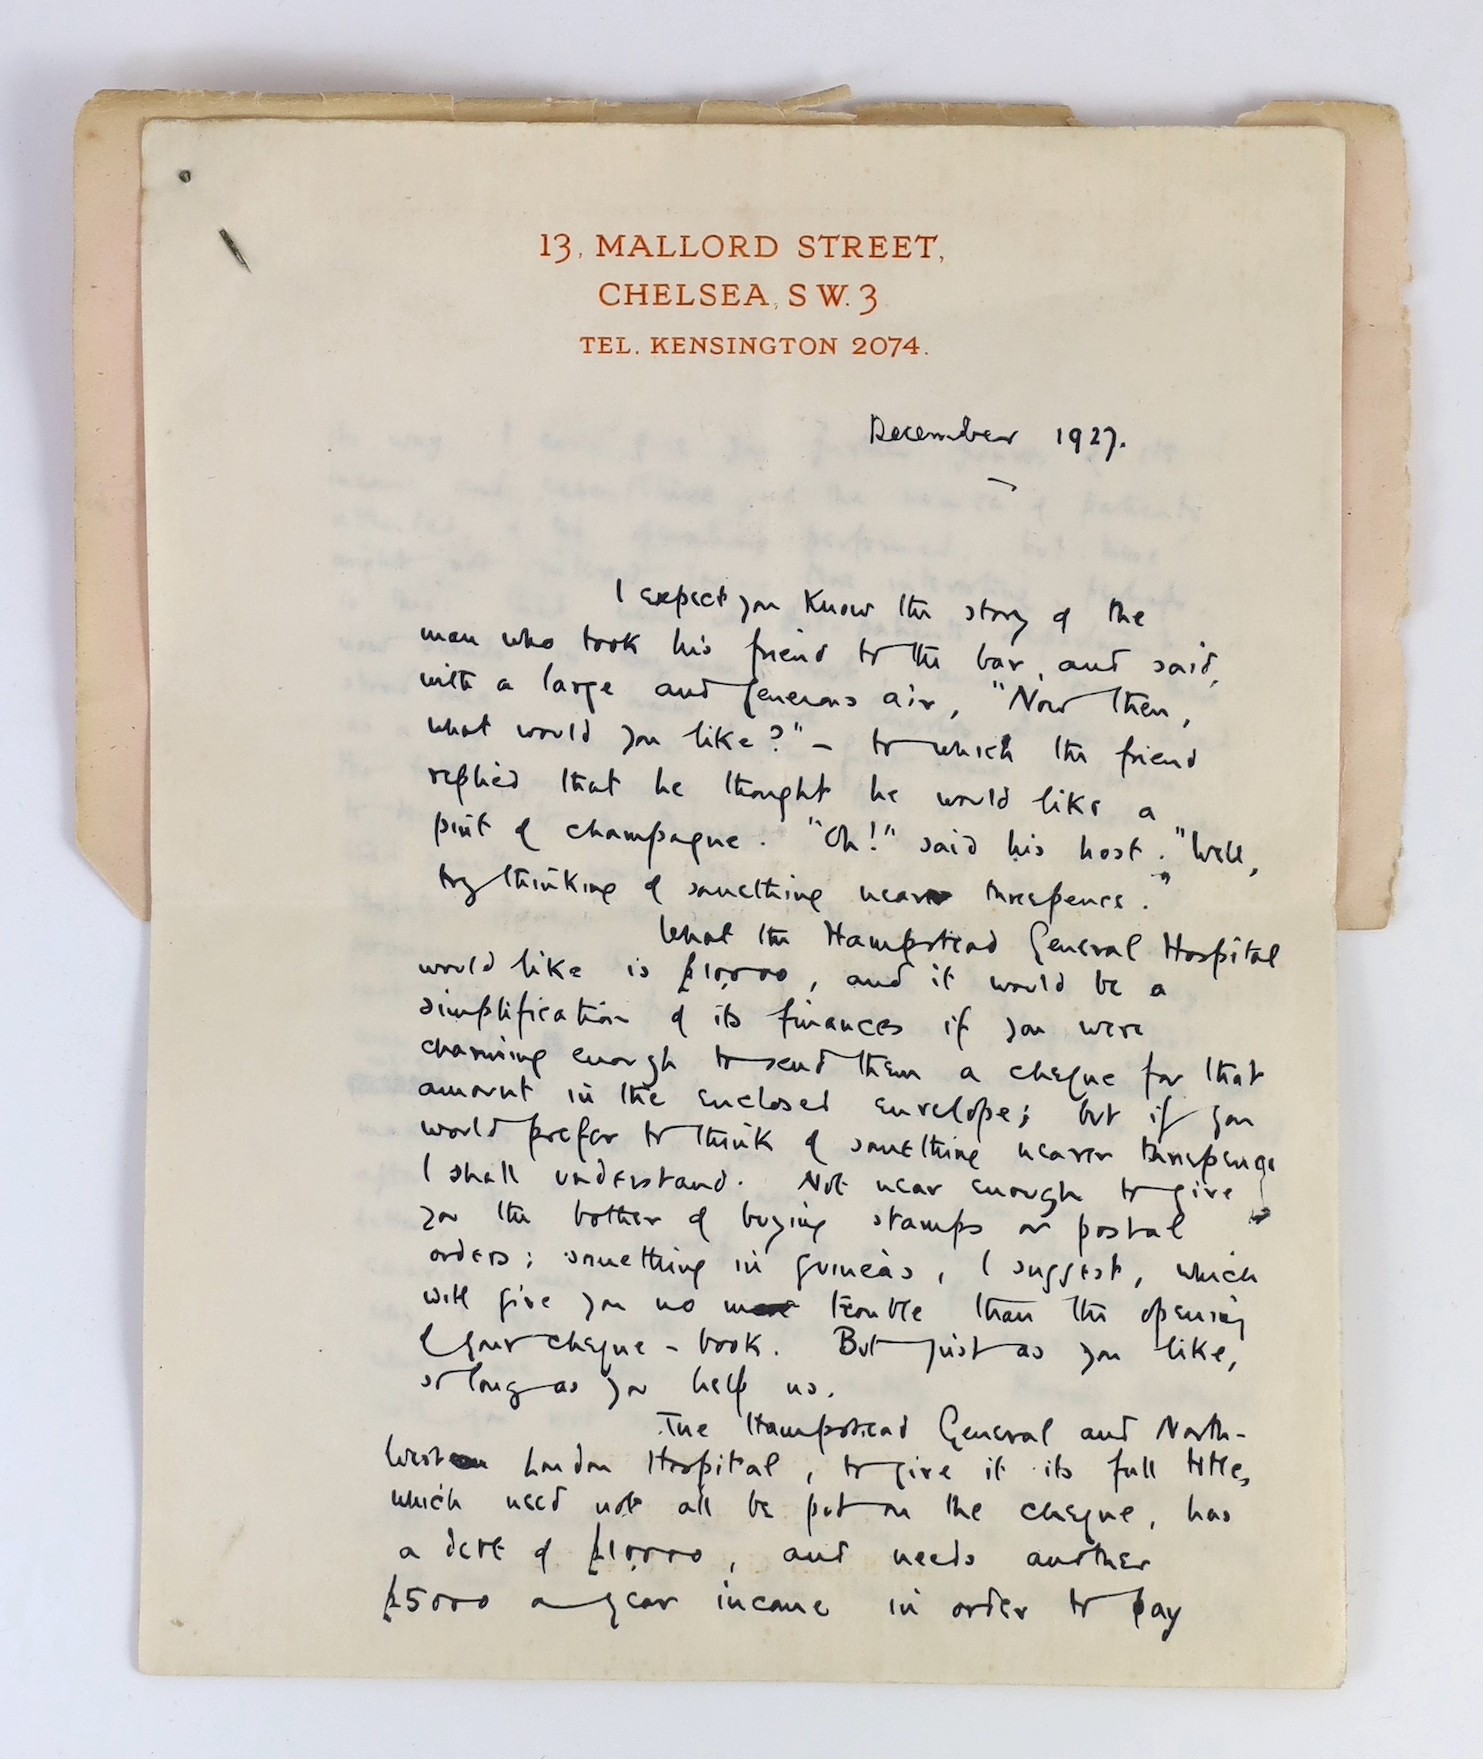 Milne, Alan Alexander (1882-1956) - An a/l, 3pp. 8vo, dated December 1927, from 13, Mallord Street, Chelsea, to an unnamed recipient, ‘’I expect you know the story of the man who took his friend to the bar, and said, wit